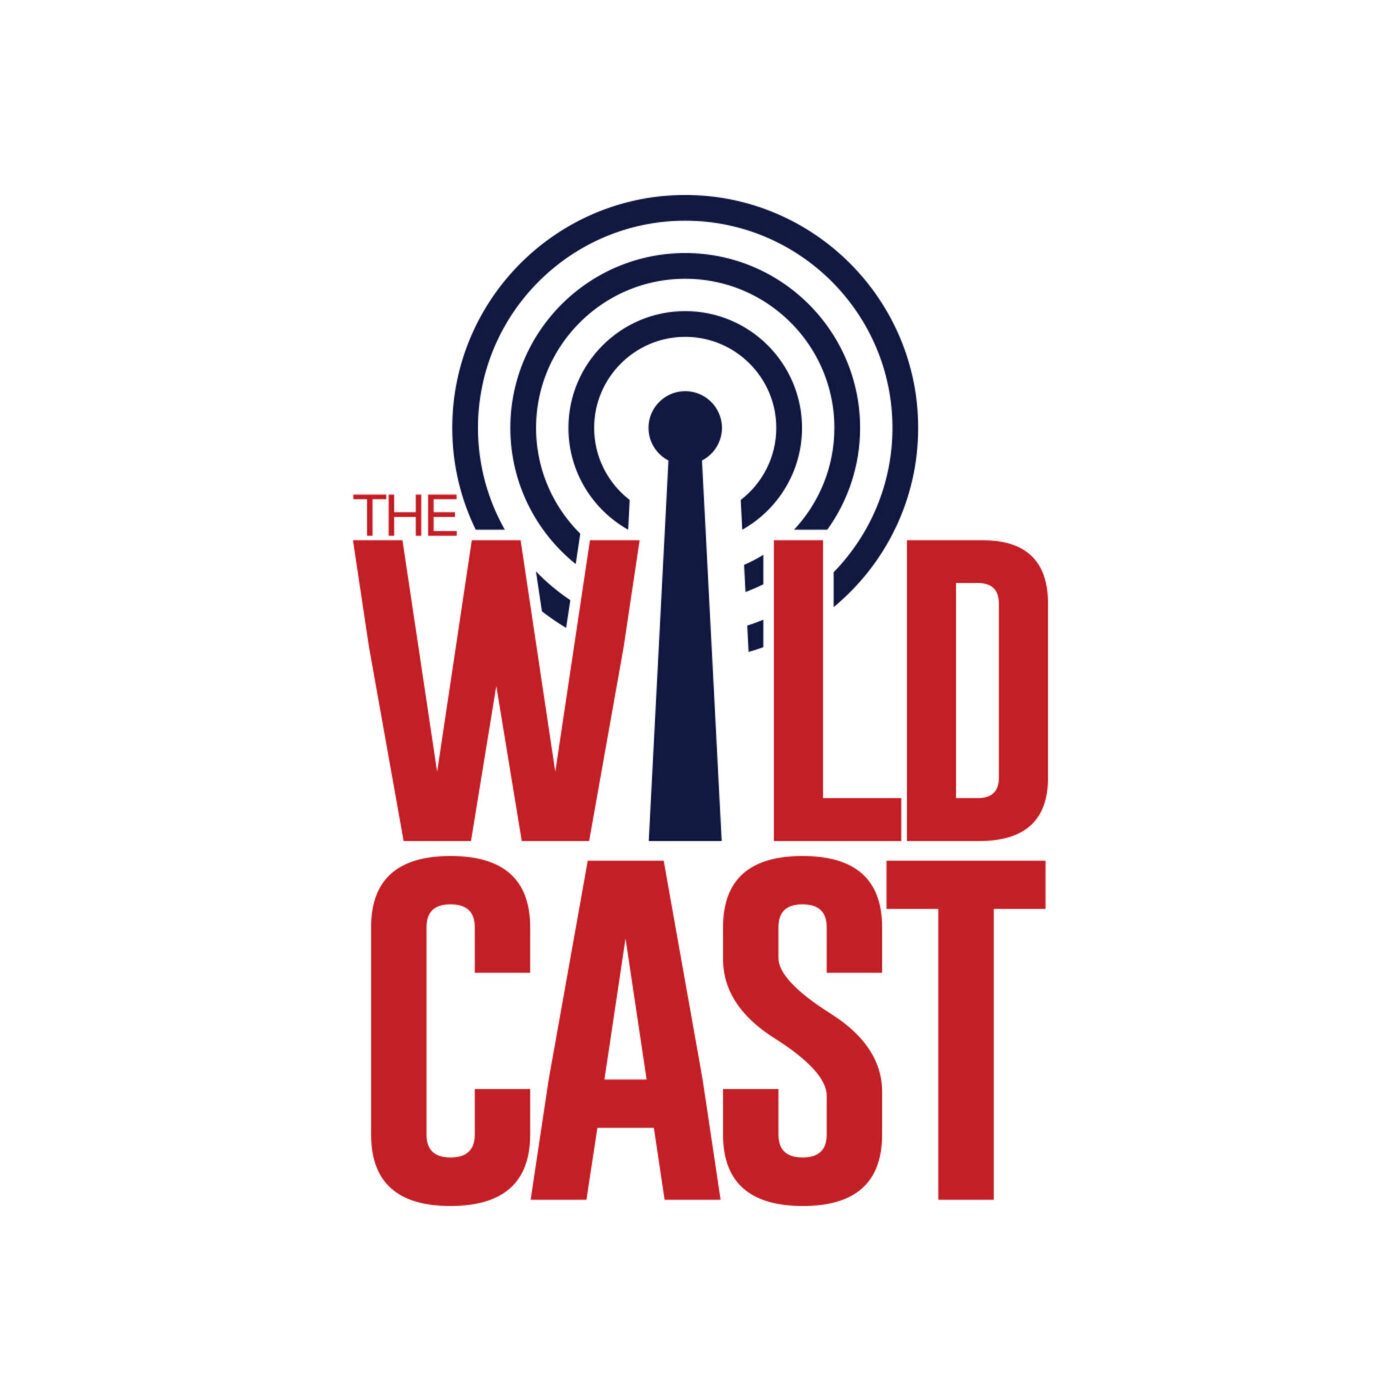 The Wildcast, Episode 441: Arizona is bowling! How much better can the Wildcats get?